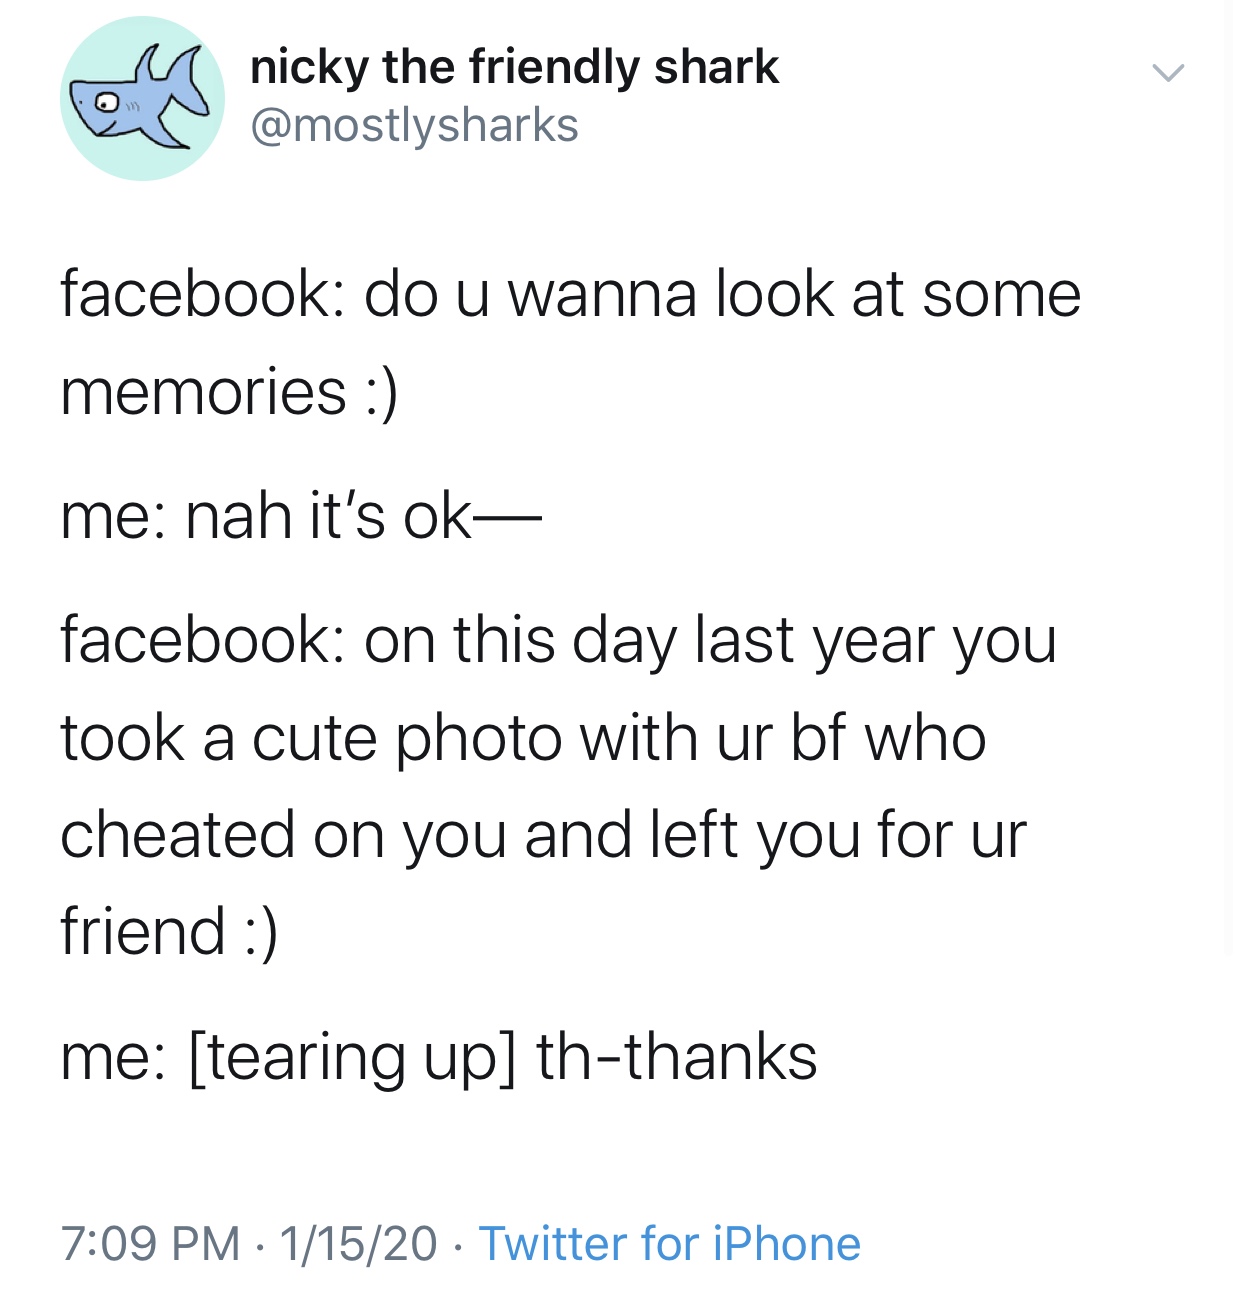 angle - nicky the friendly shark facebook do u wanna look at some memories me nah it's ok facebook on this day last year you took a cute photo with ur bf who cheated on you and left you for ur friend me tearing up ththanks 11520 Twitter for iPhone